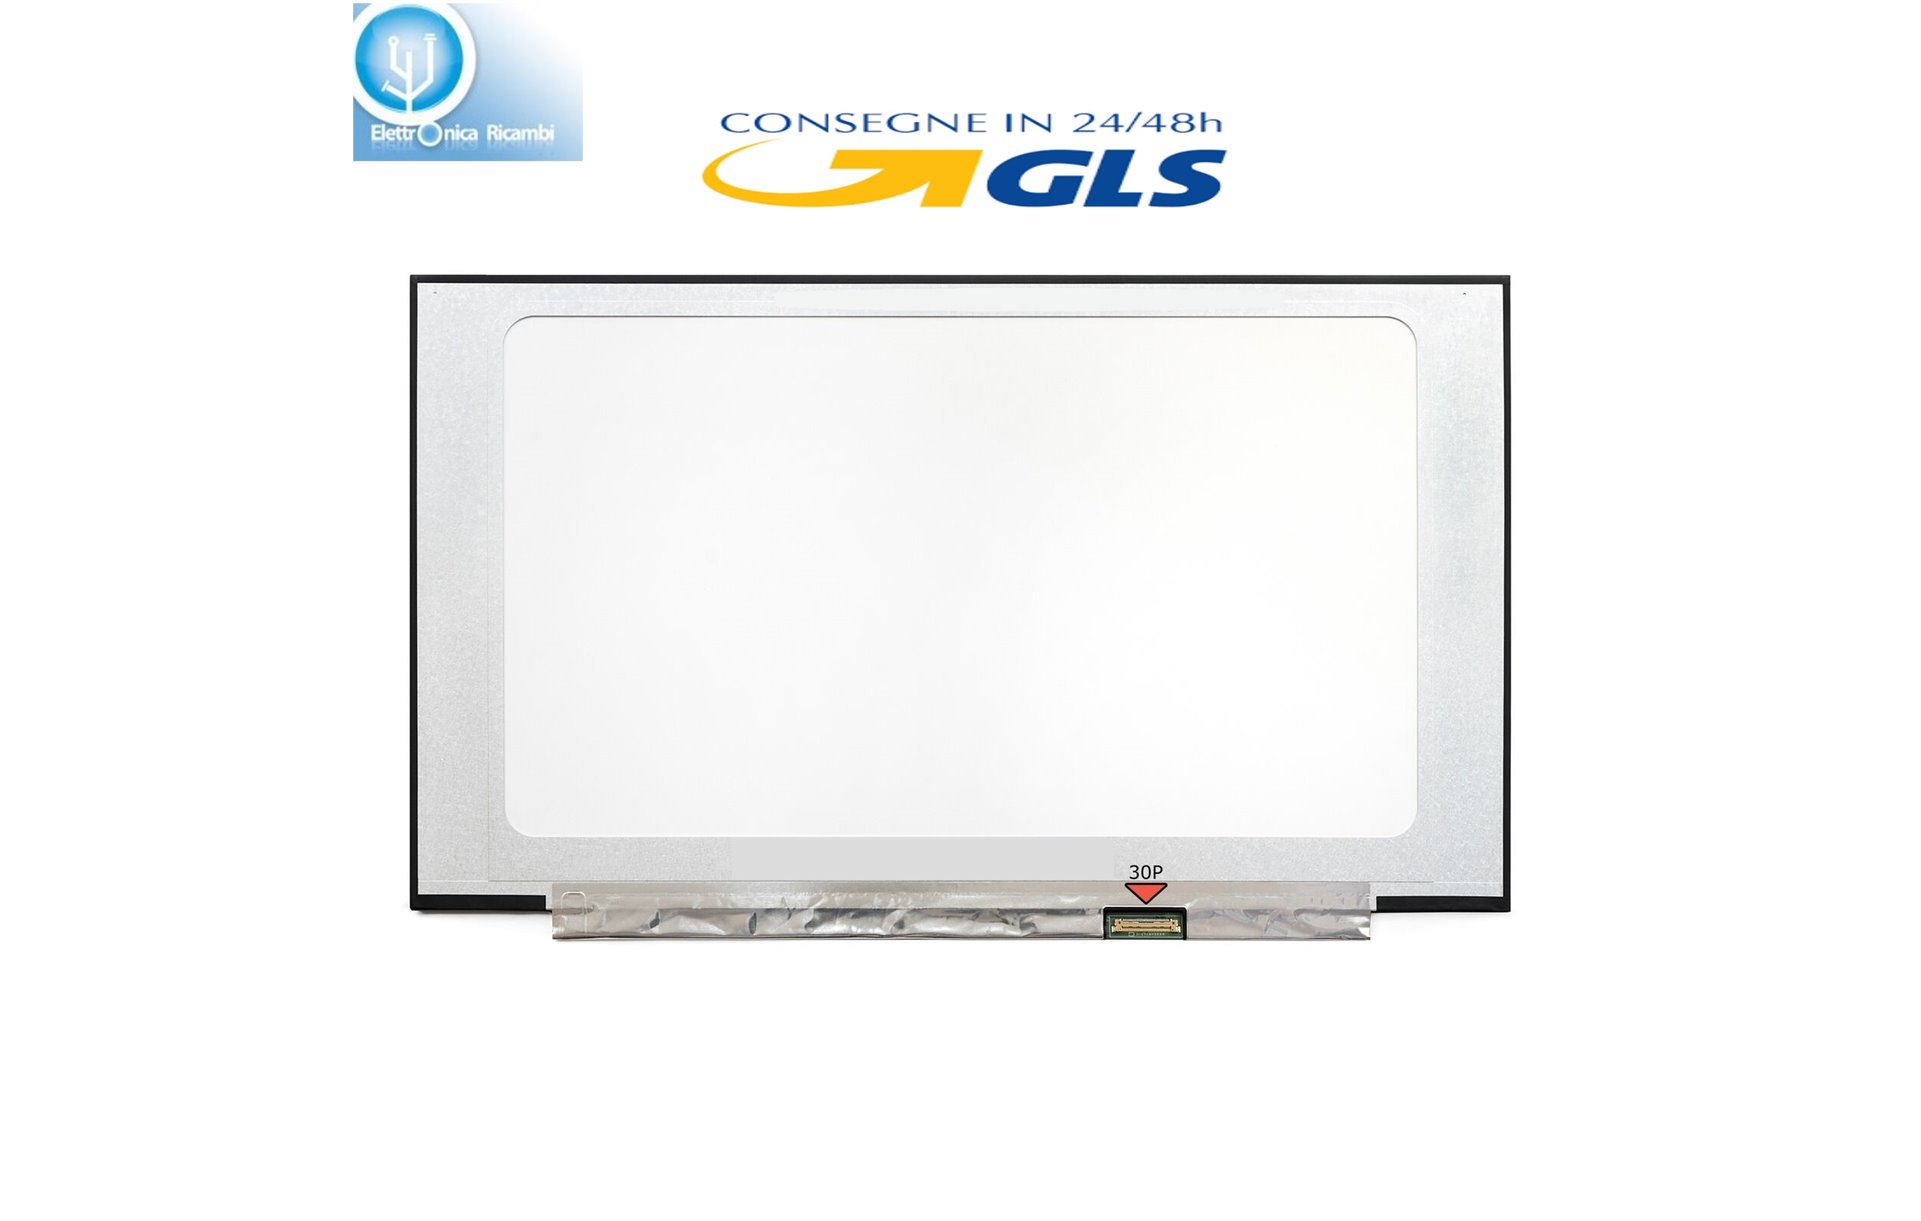 Display LCD 15,6 LED Acer ASPIRE 5 SERIE A515-54G SERIES Slim 1920x1080 30 pin Fh IPS